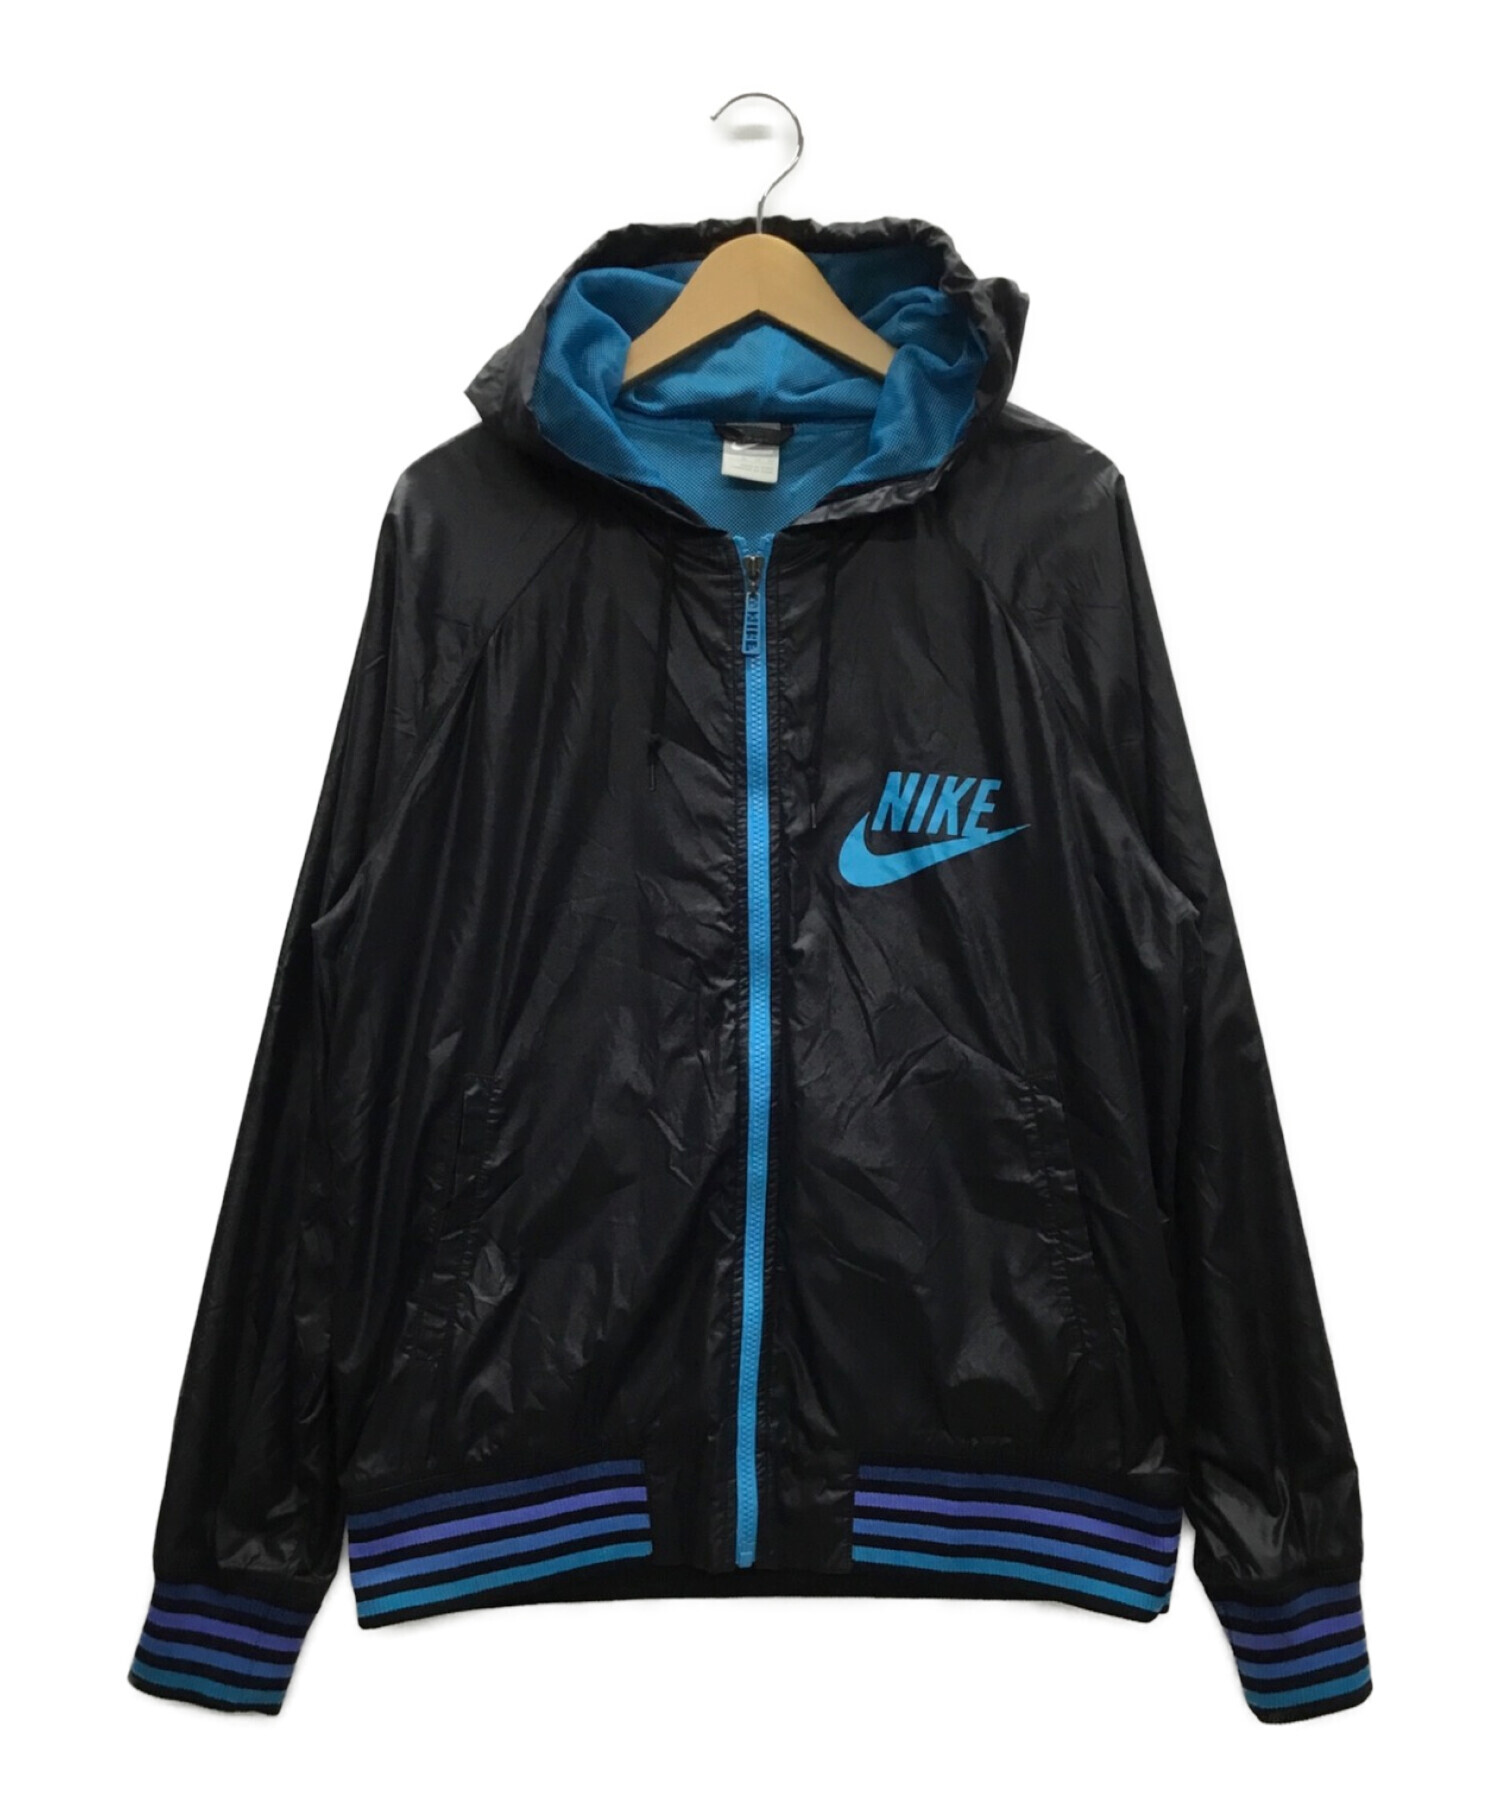 NIKE ナイロンパーカー　XL